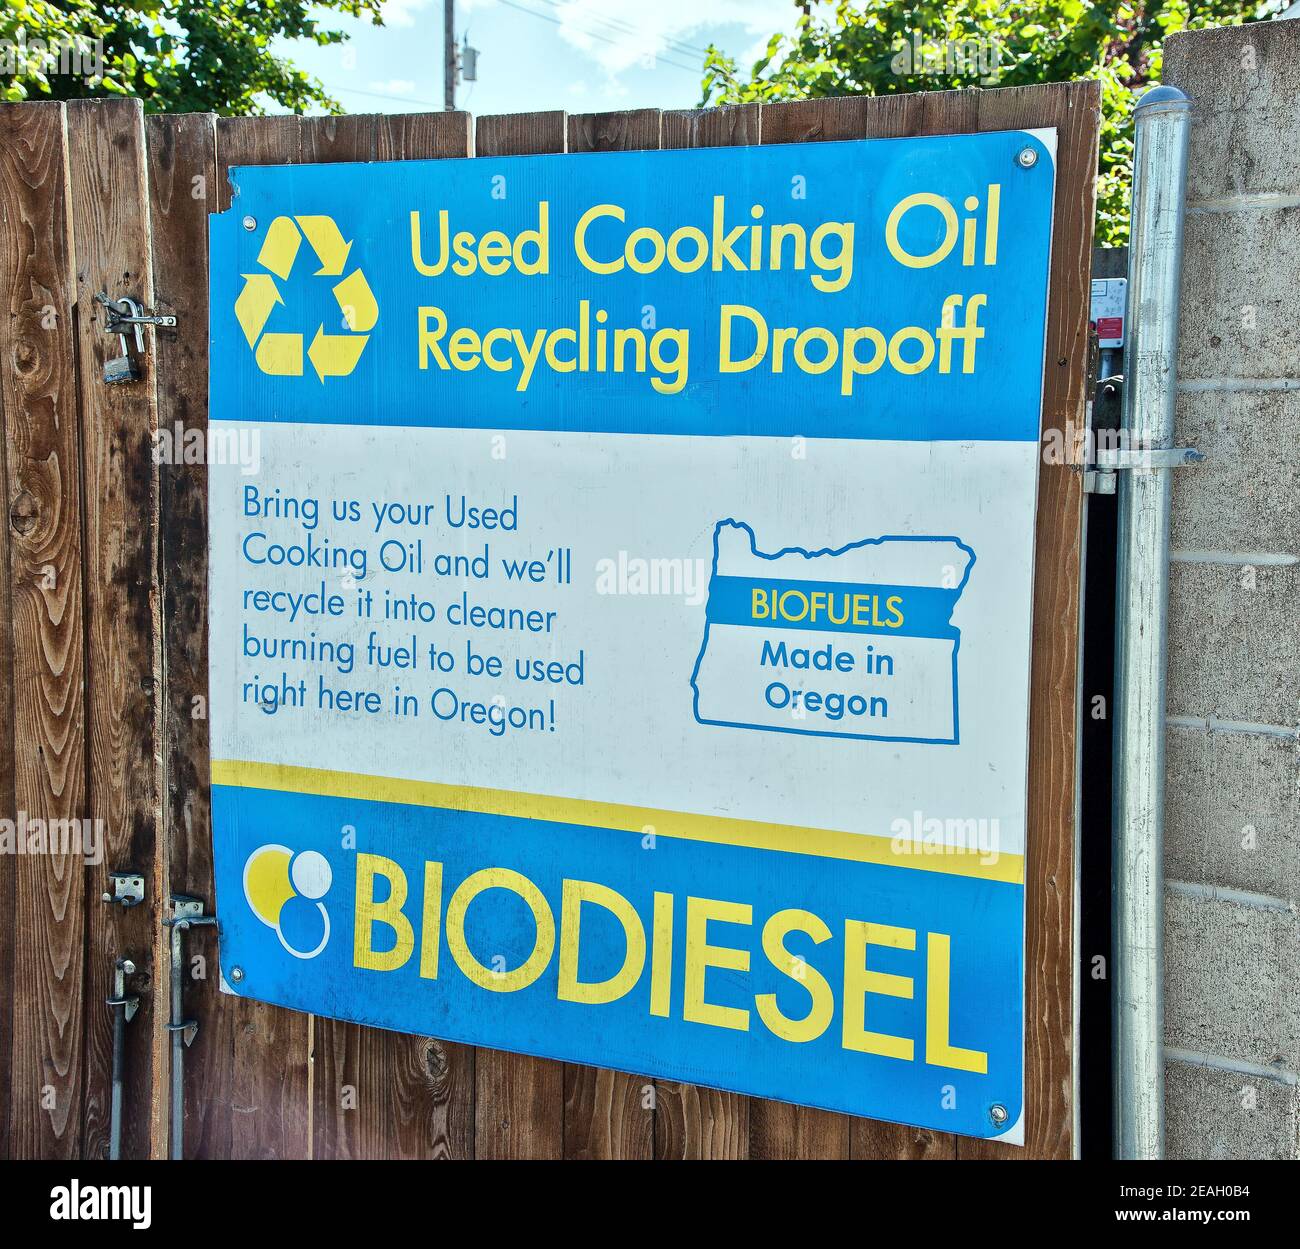 Sign  'Used Cooking Oil Recycling Dropoff' ' promoting commercial used cooking oil to produce Biofuels in Oregon. Stock Photo